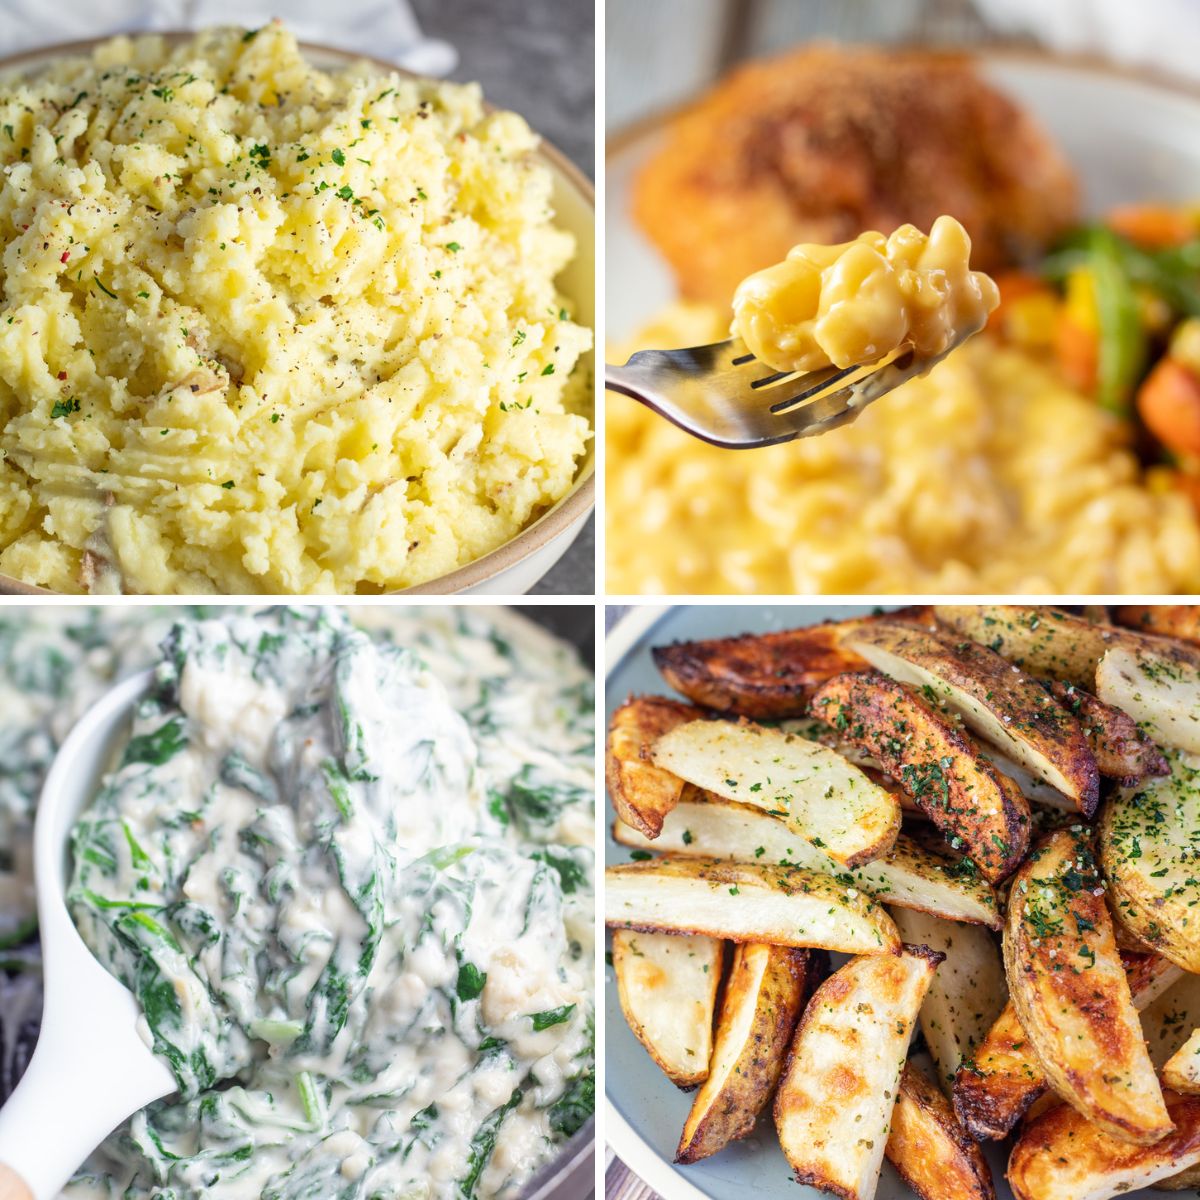 What to serve with chicken dinner side dish ideas illustrated with 4 favorites in a collage.